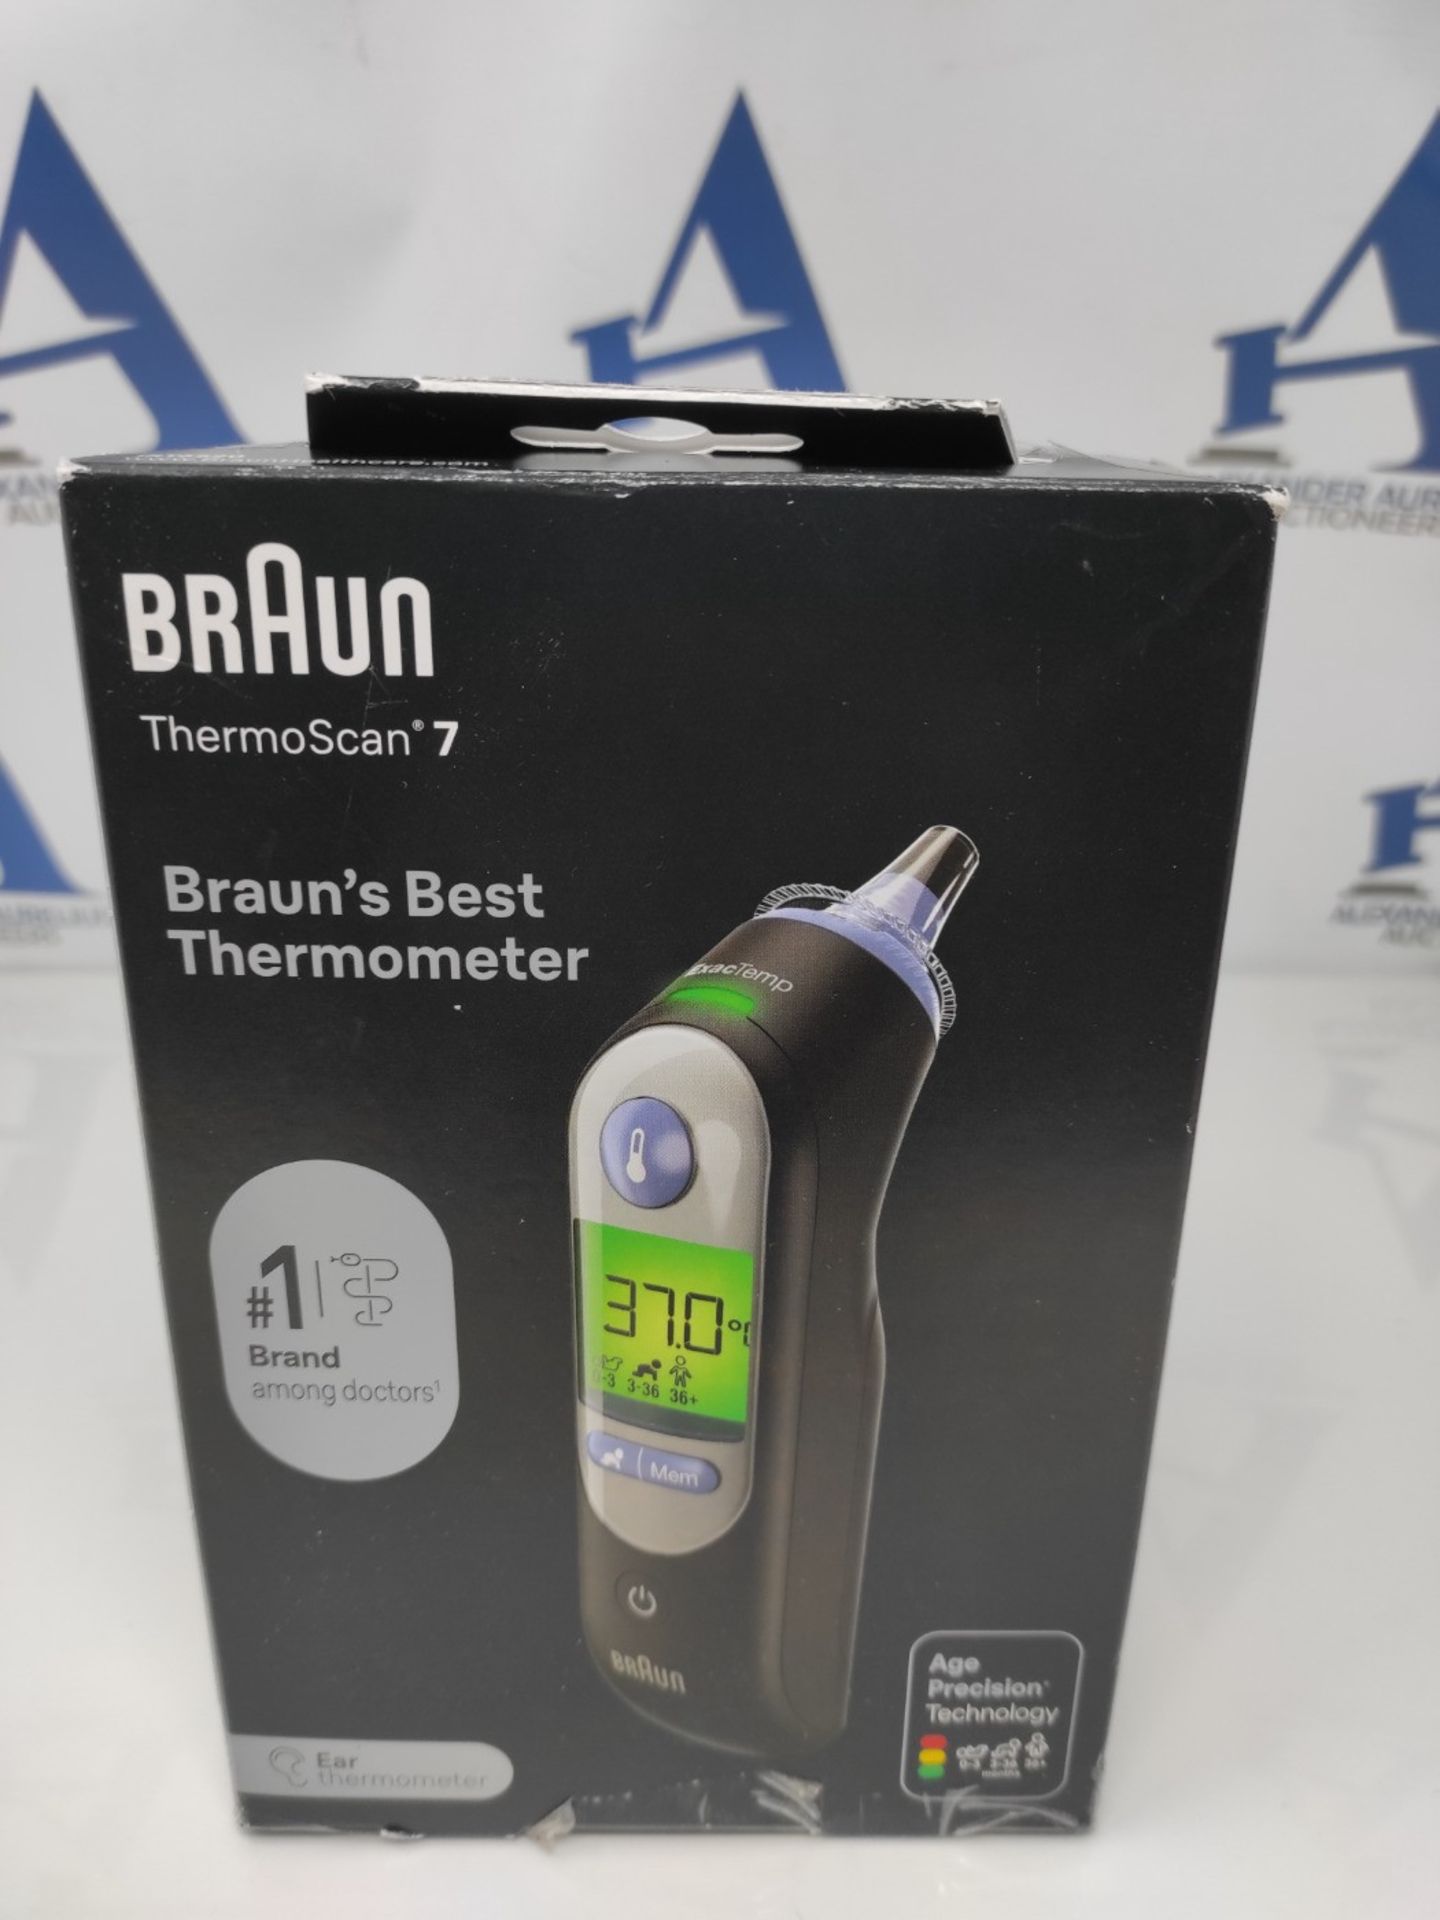 RRP £59.00 Braun ThermoScan 7 Ear Thermometer Black | Age Precision Technology | Digital Display - Image 3 of 3